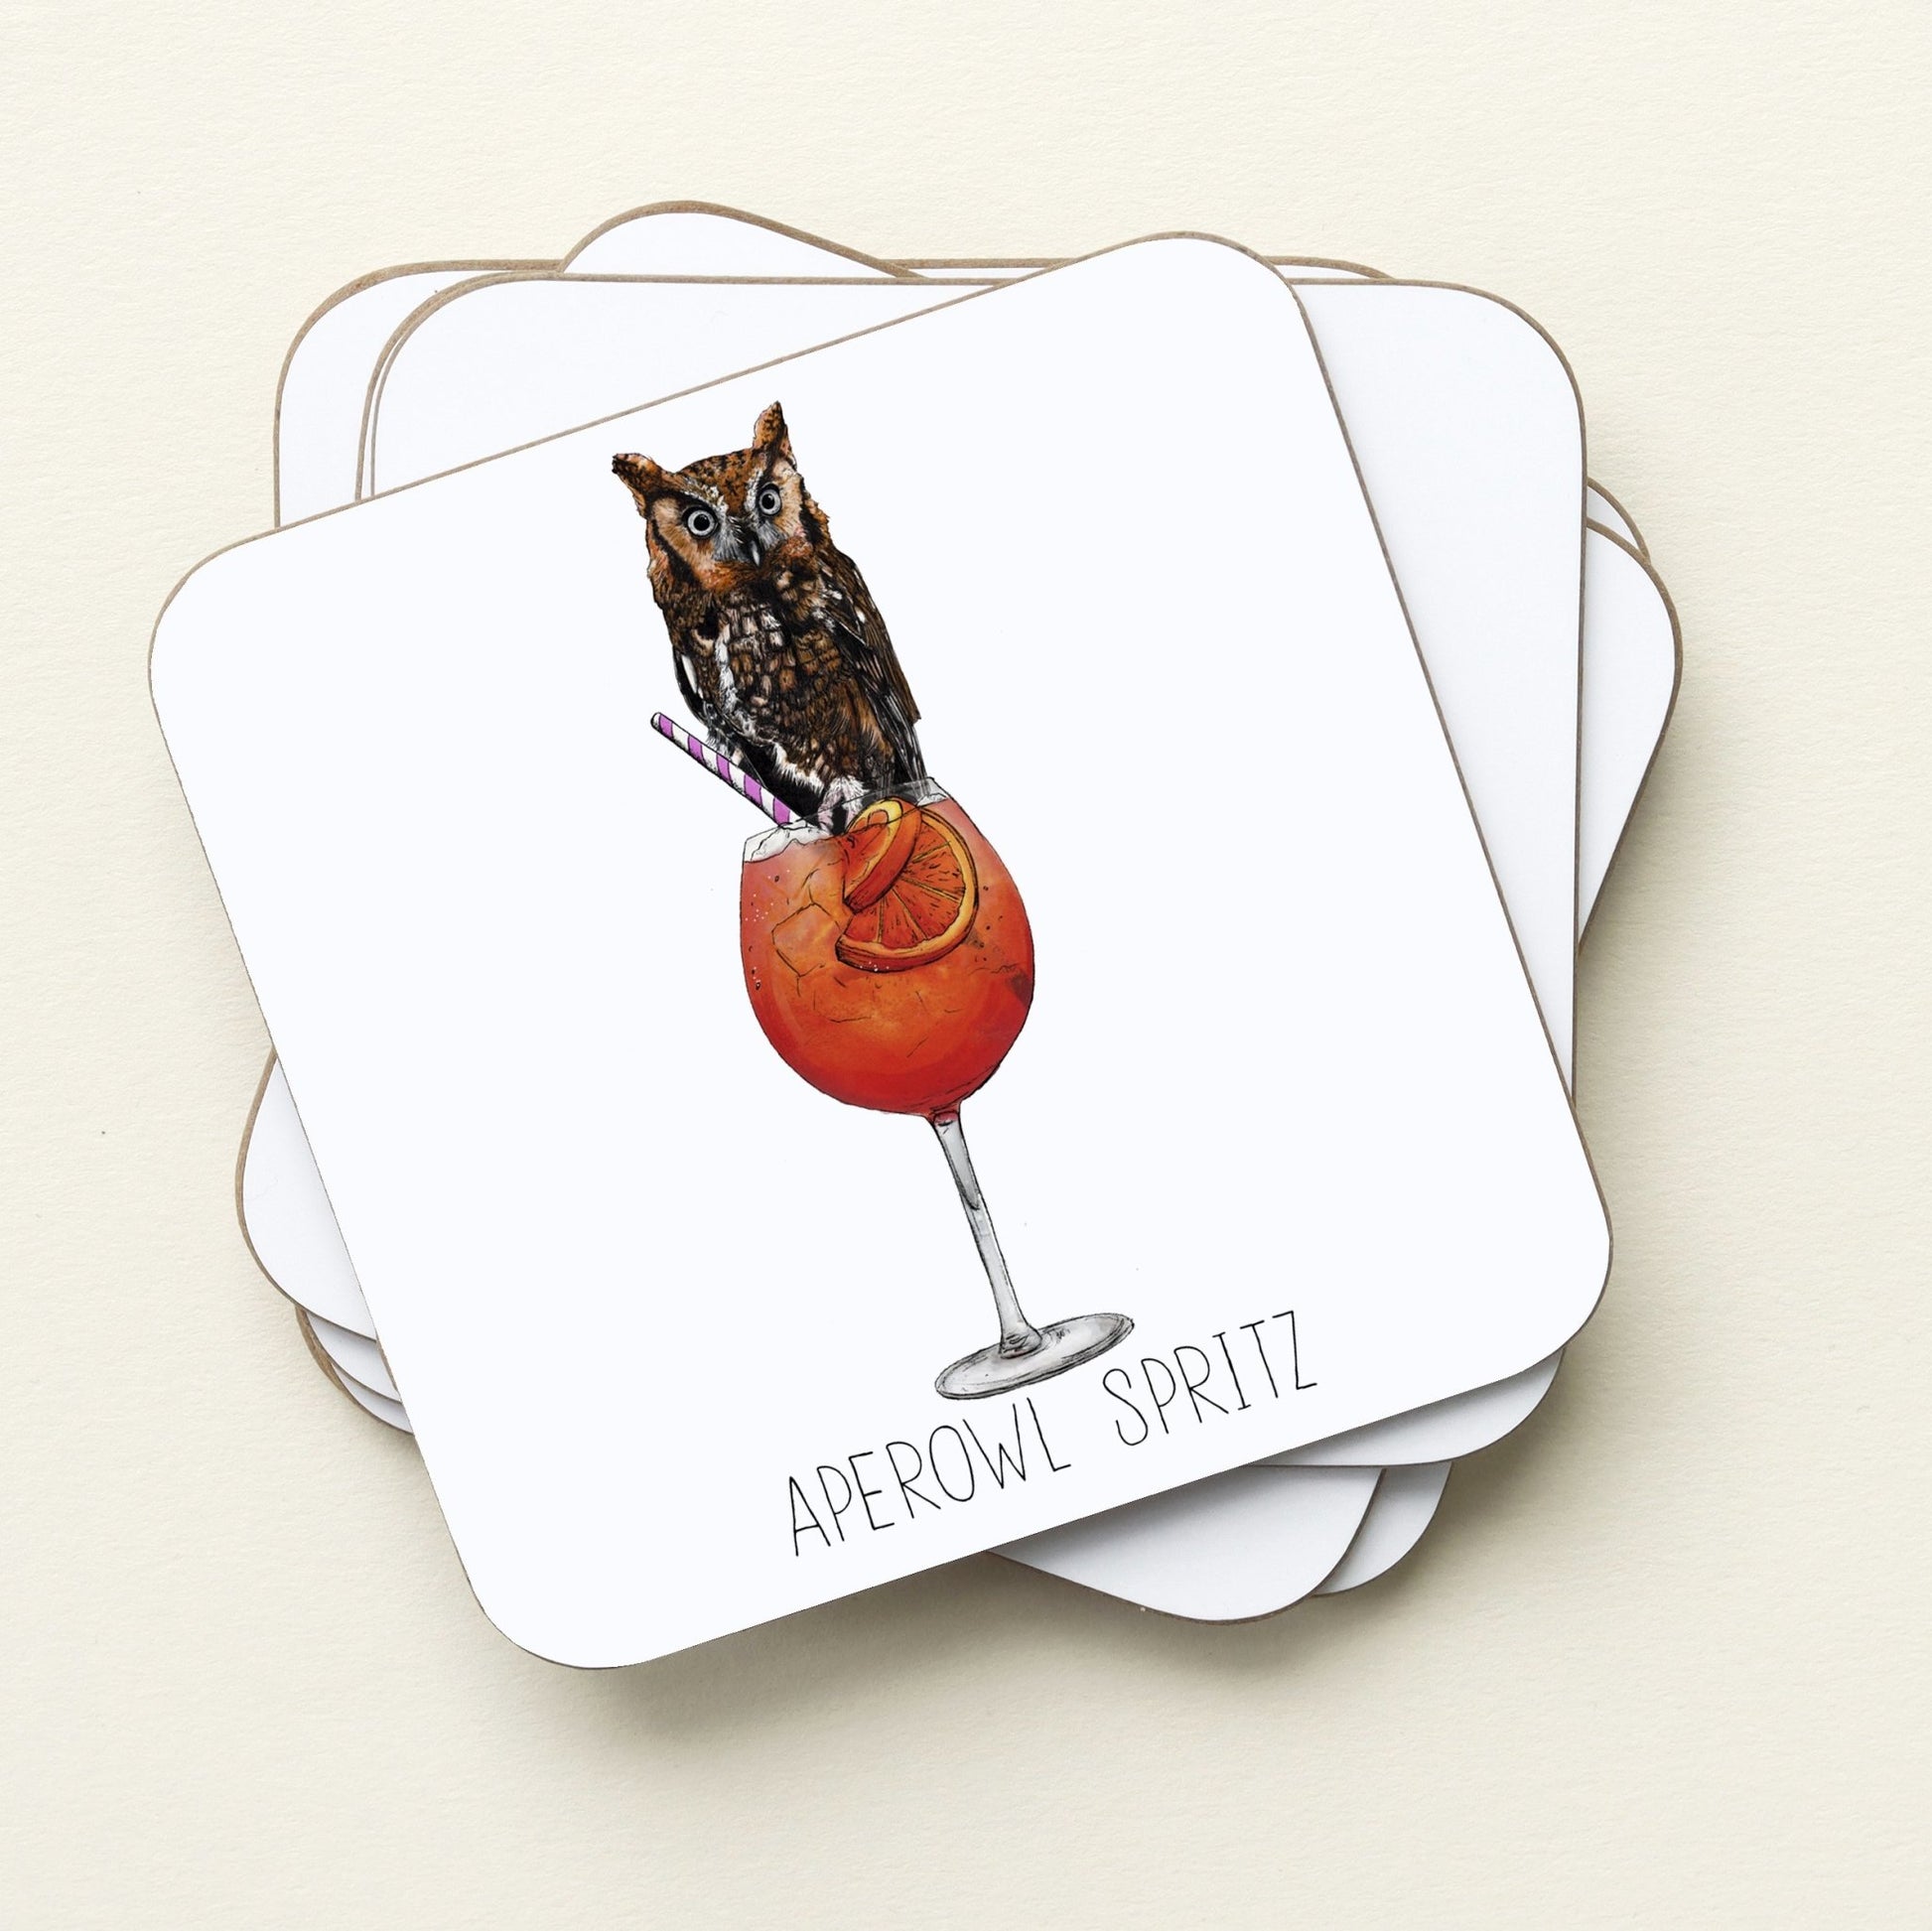 Aperowl Spritz Drinks Coaster - Fawn and Thistle